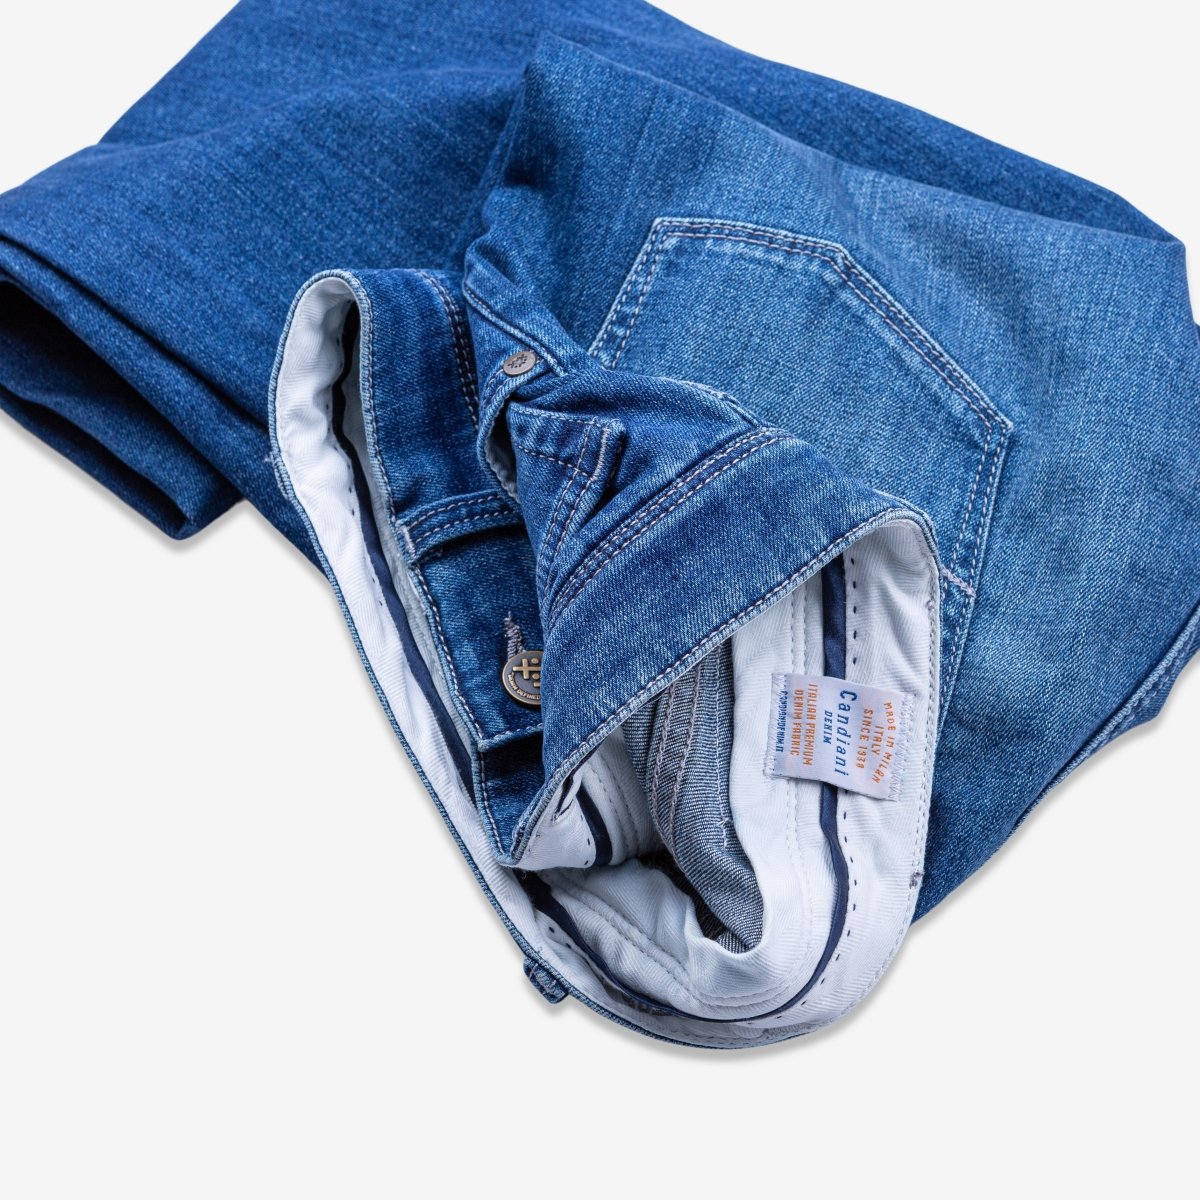 NEW TAILOR - Spijkerbroek, Middenblauw Washed (Candiani), Jeans | NEW TAILOR Webshop